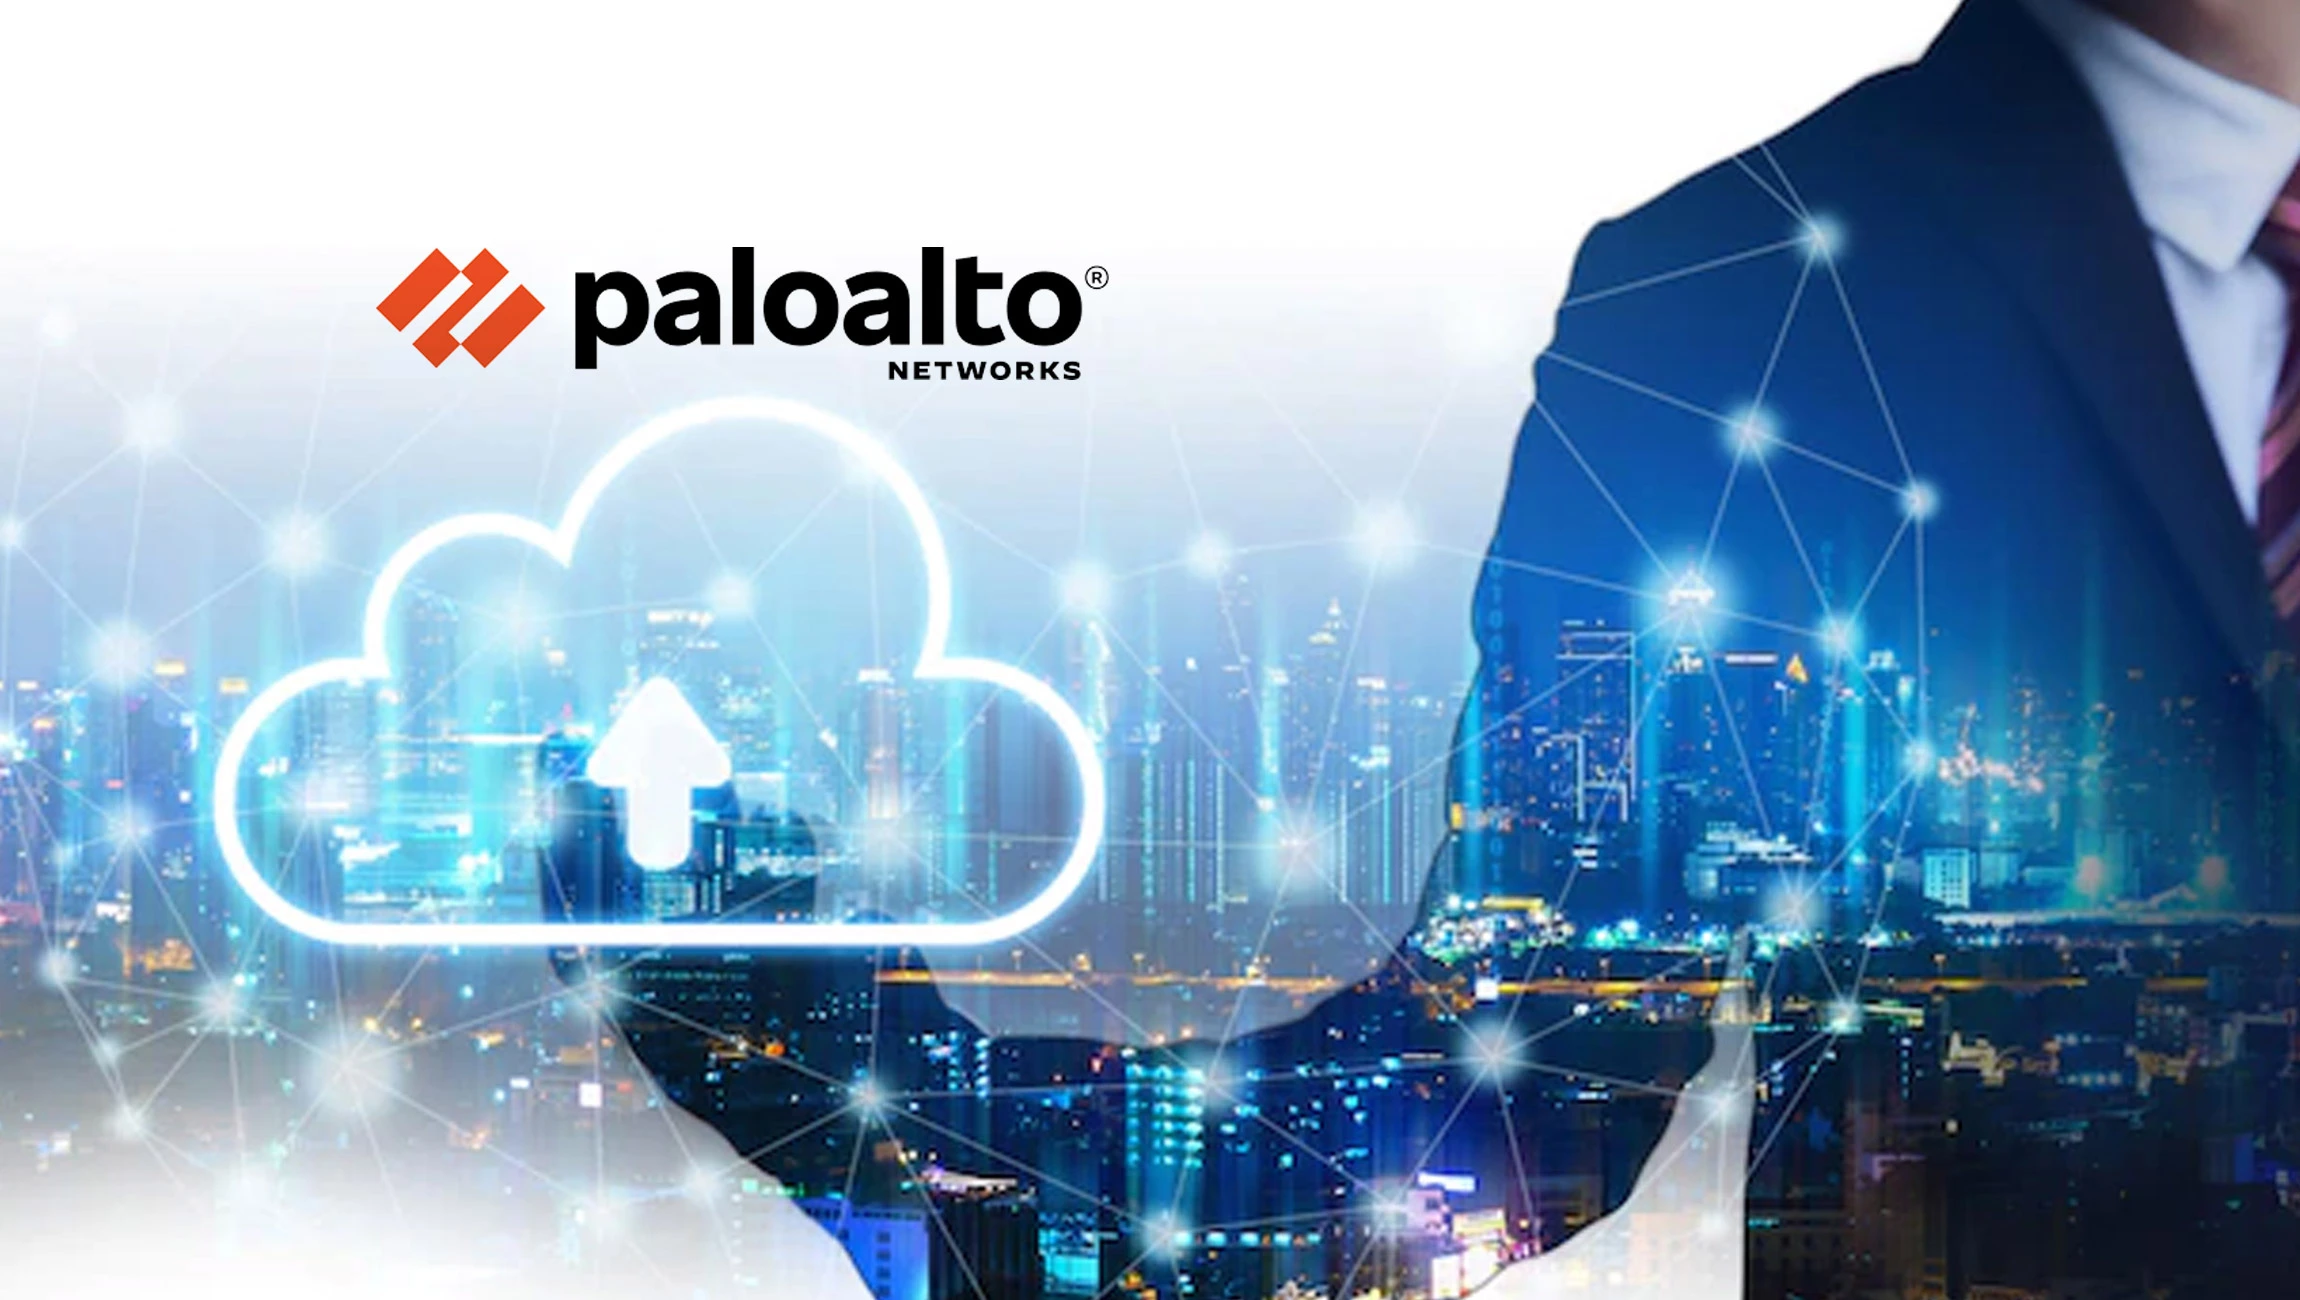 Palo Alto Networks - Cybersecurity Solution by ACCESSYSTEM® Technologies Inc - Digital Transformation, IT, IoT & AI Solution & Services.